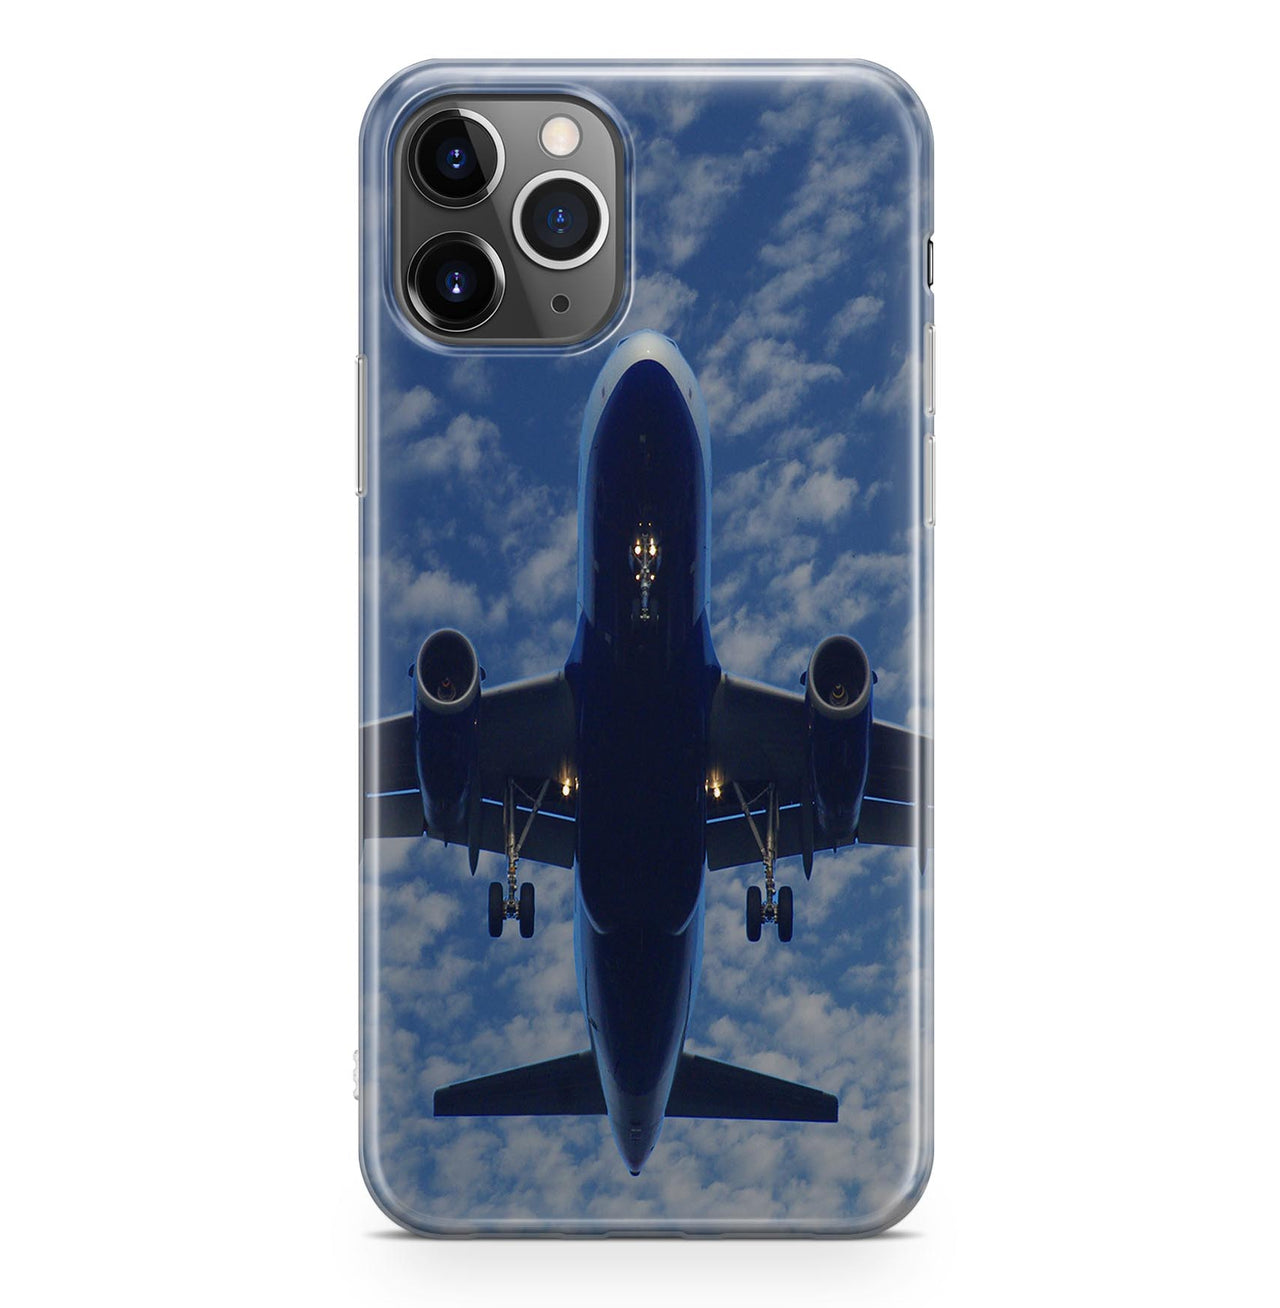 Airplane From Below Designed iPhone Cases